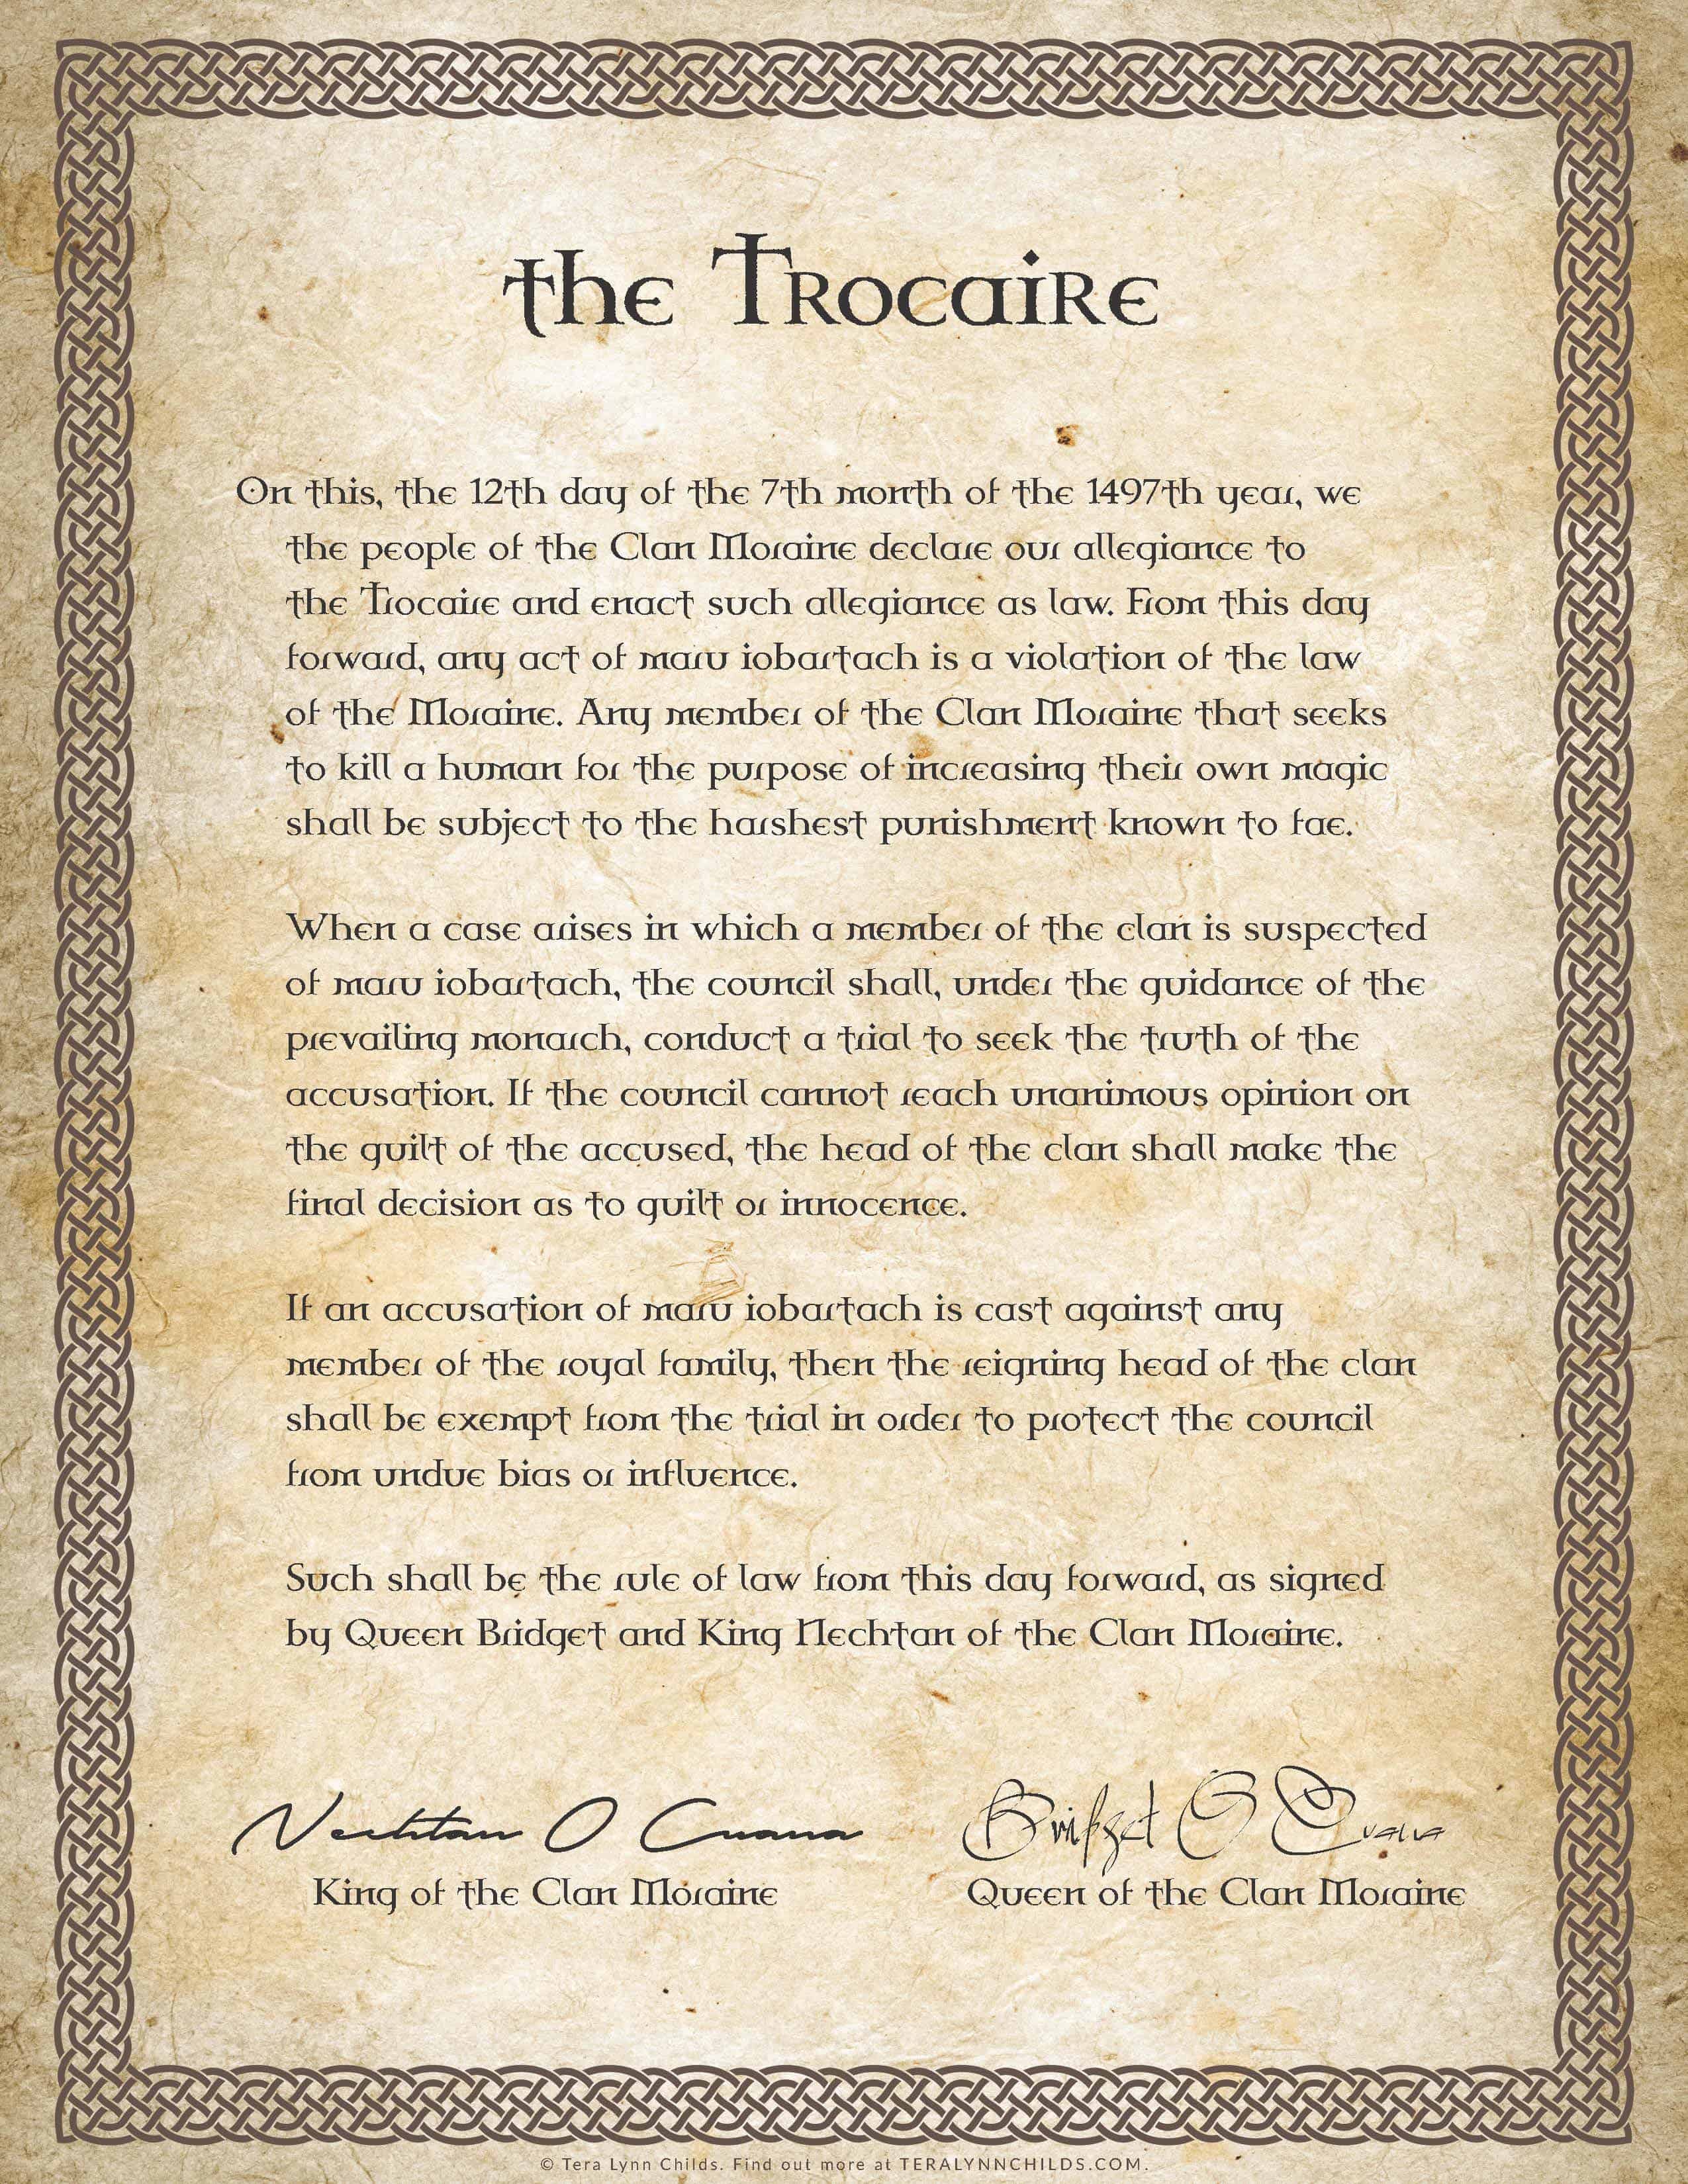 The Trocaire document » The law that forbids the killing of humans for magical gain by the members of the Clan Moraine. 